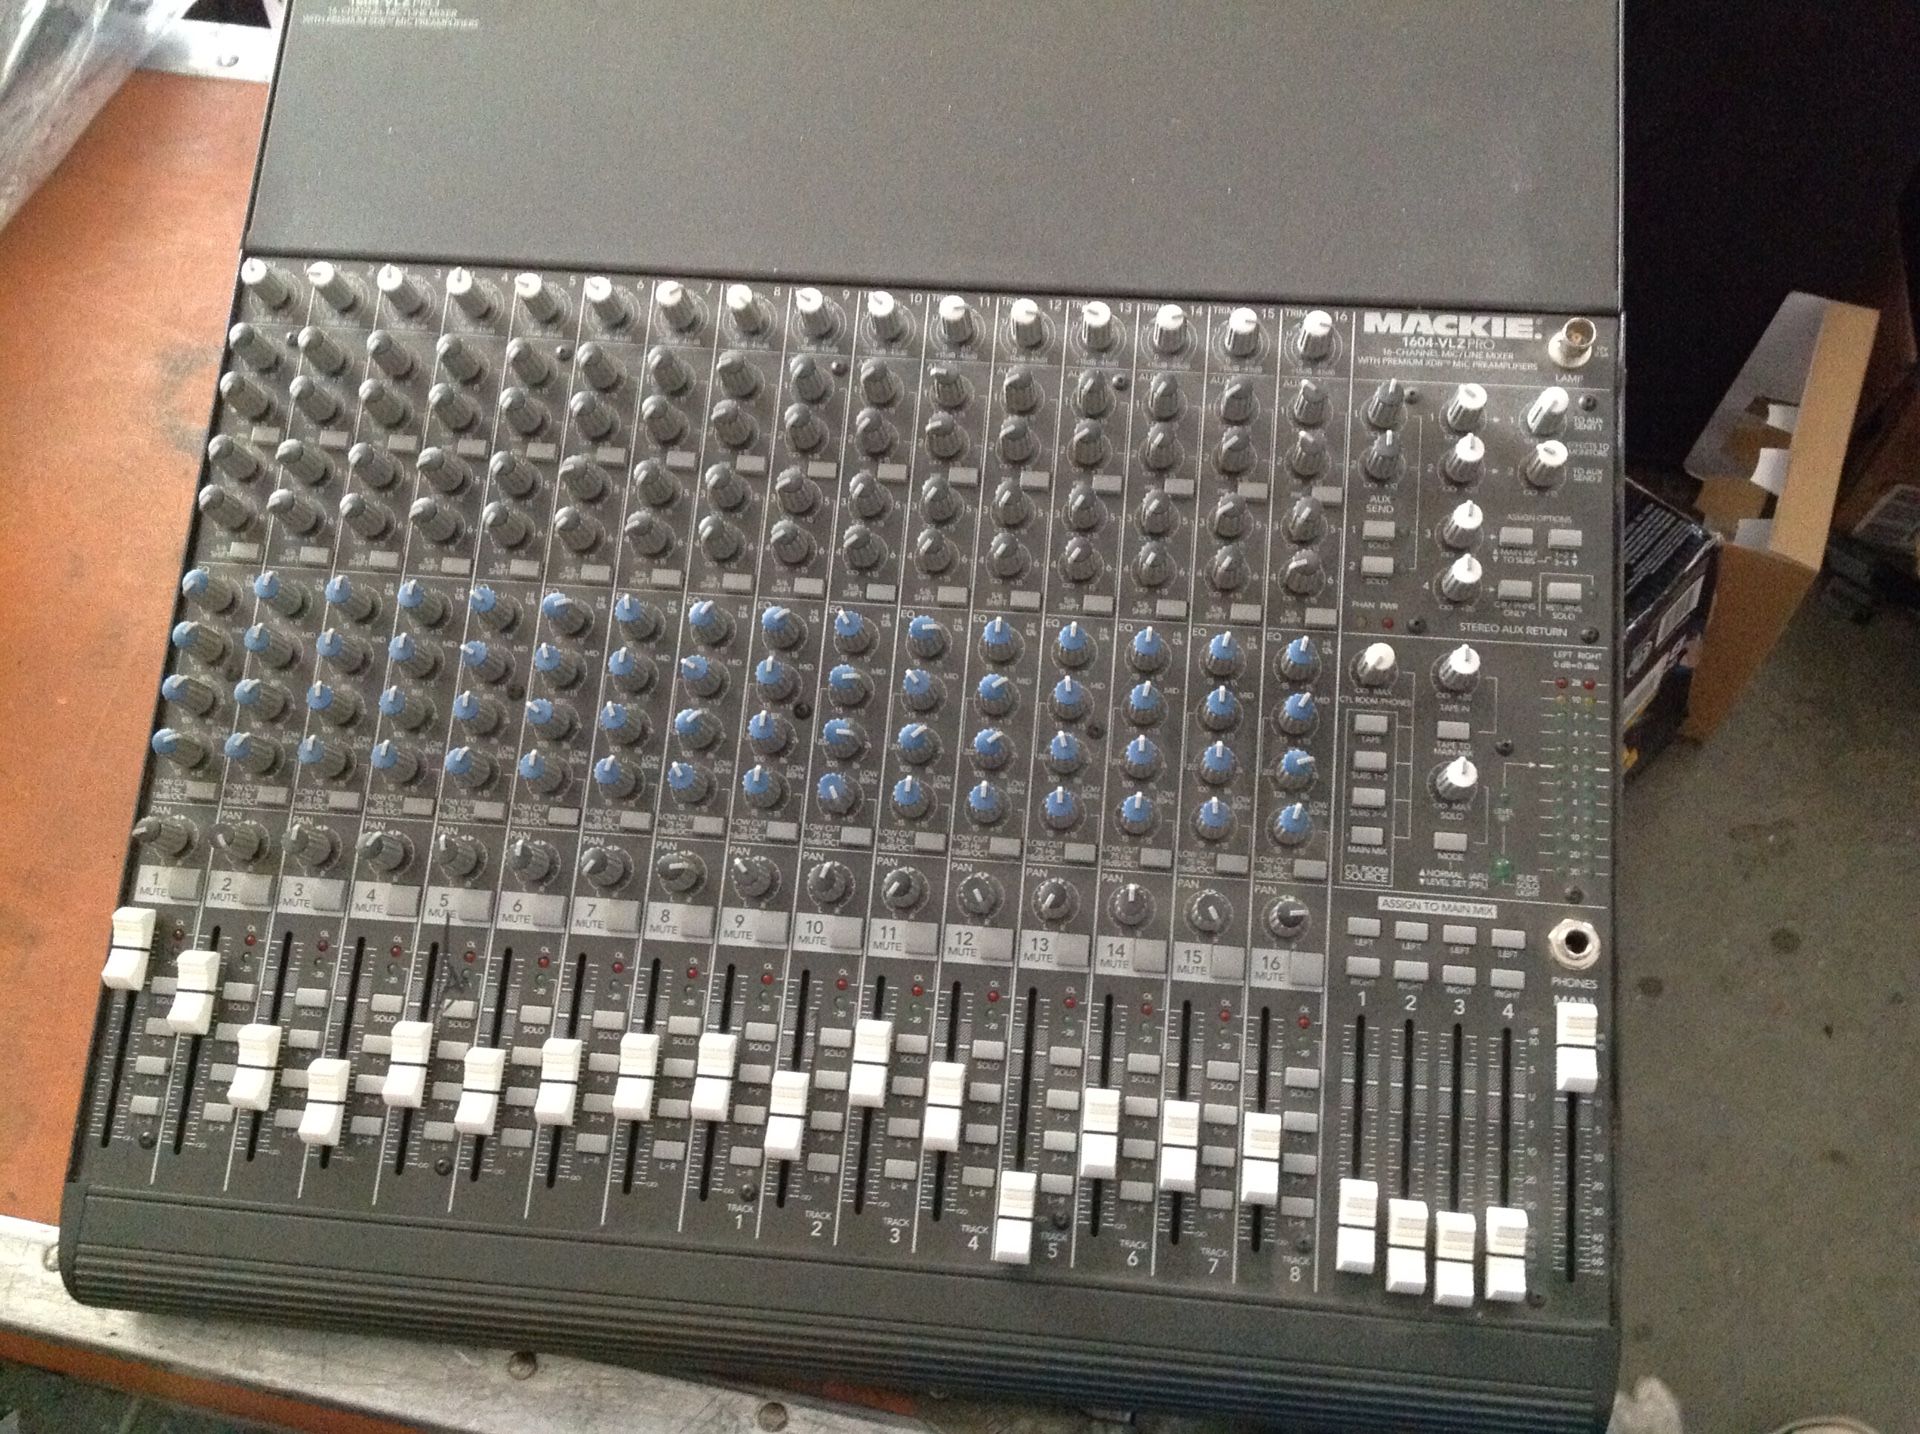 Mackie 1604Vlz Pro mixer for band / Dj ... Made in the USA version like new conditions. Call or text 4O8 499 97OI to purchase